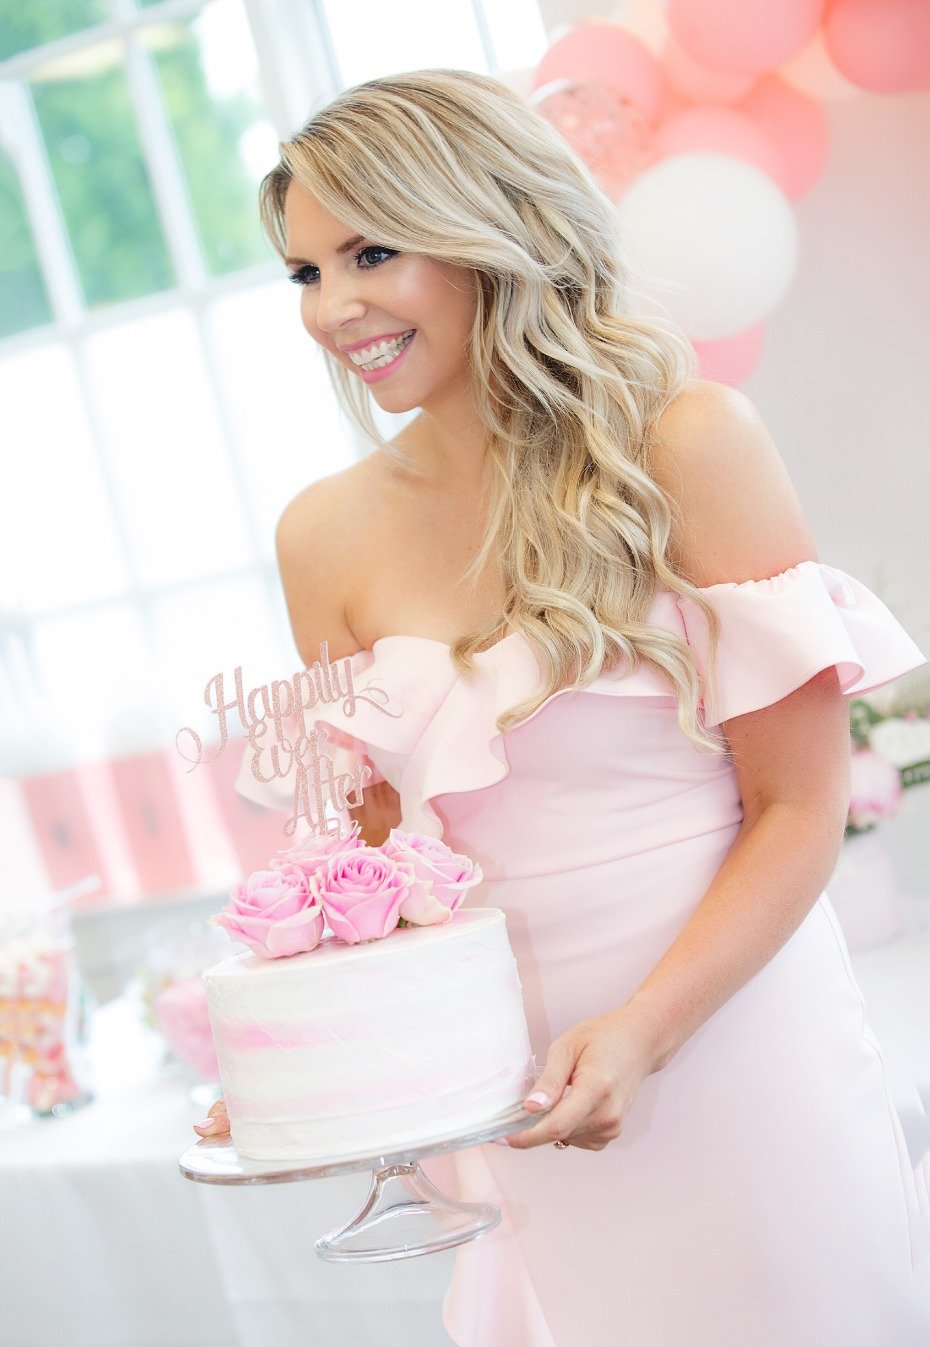 For the Love of Bridal Showers! The Pink Bridal Shower Styled